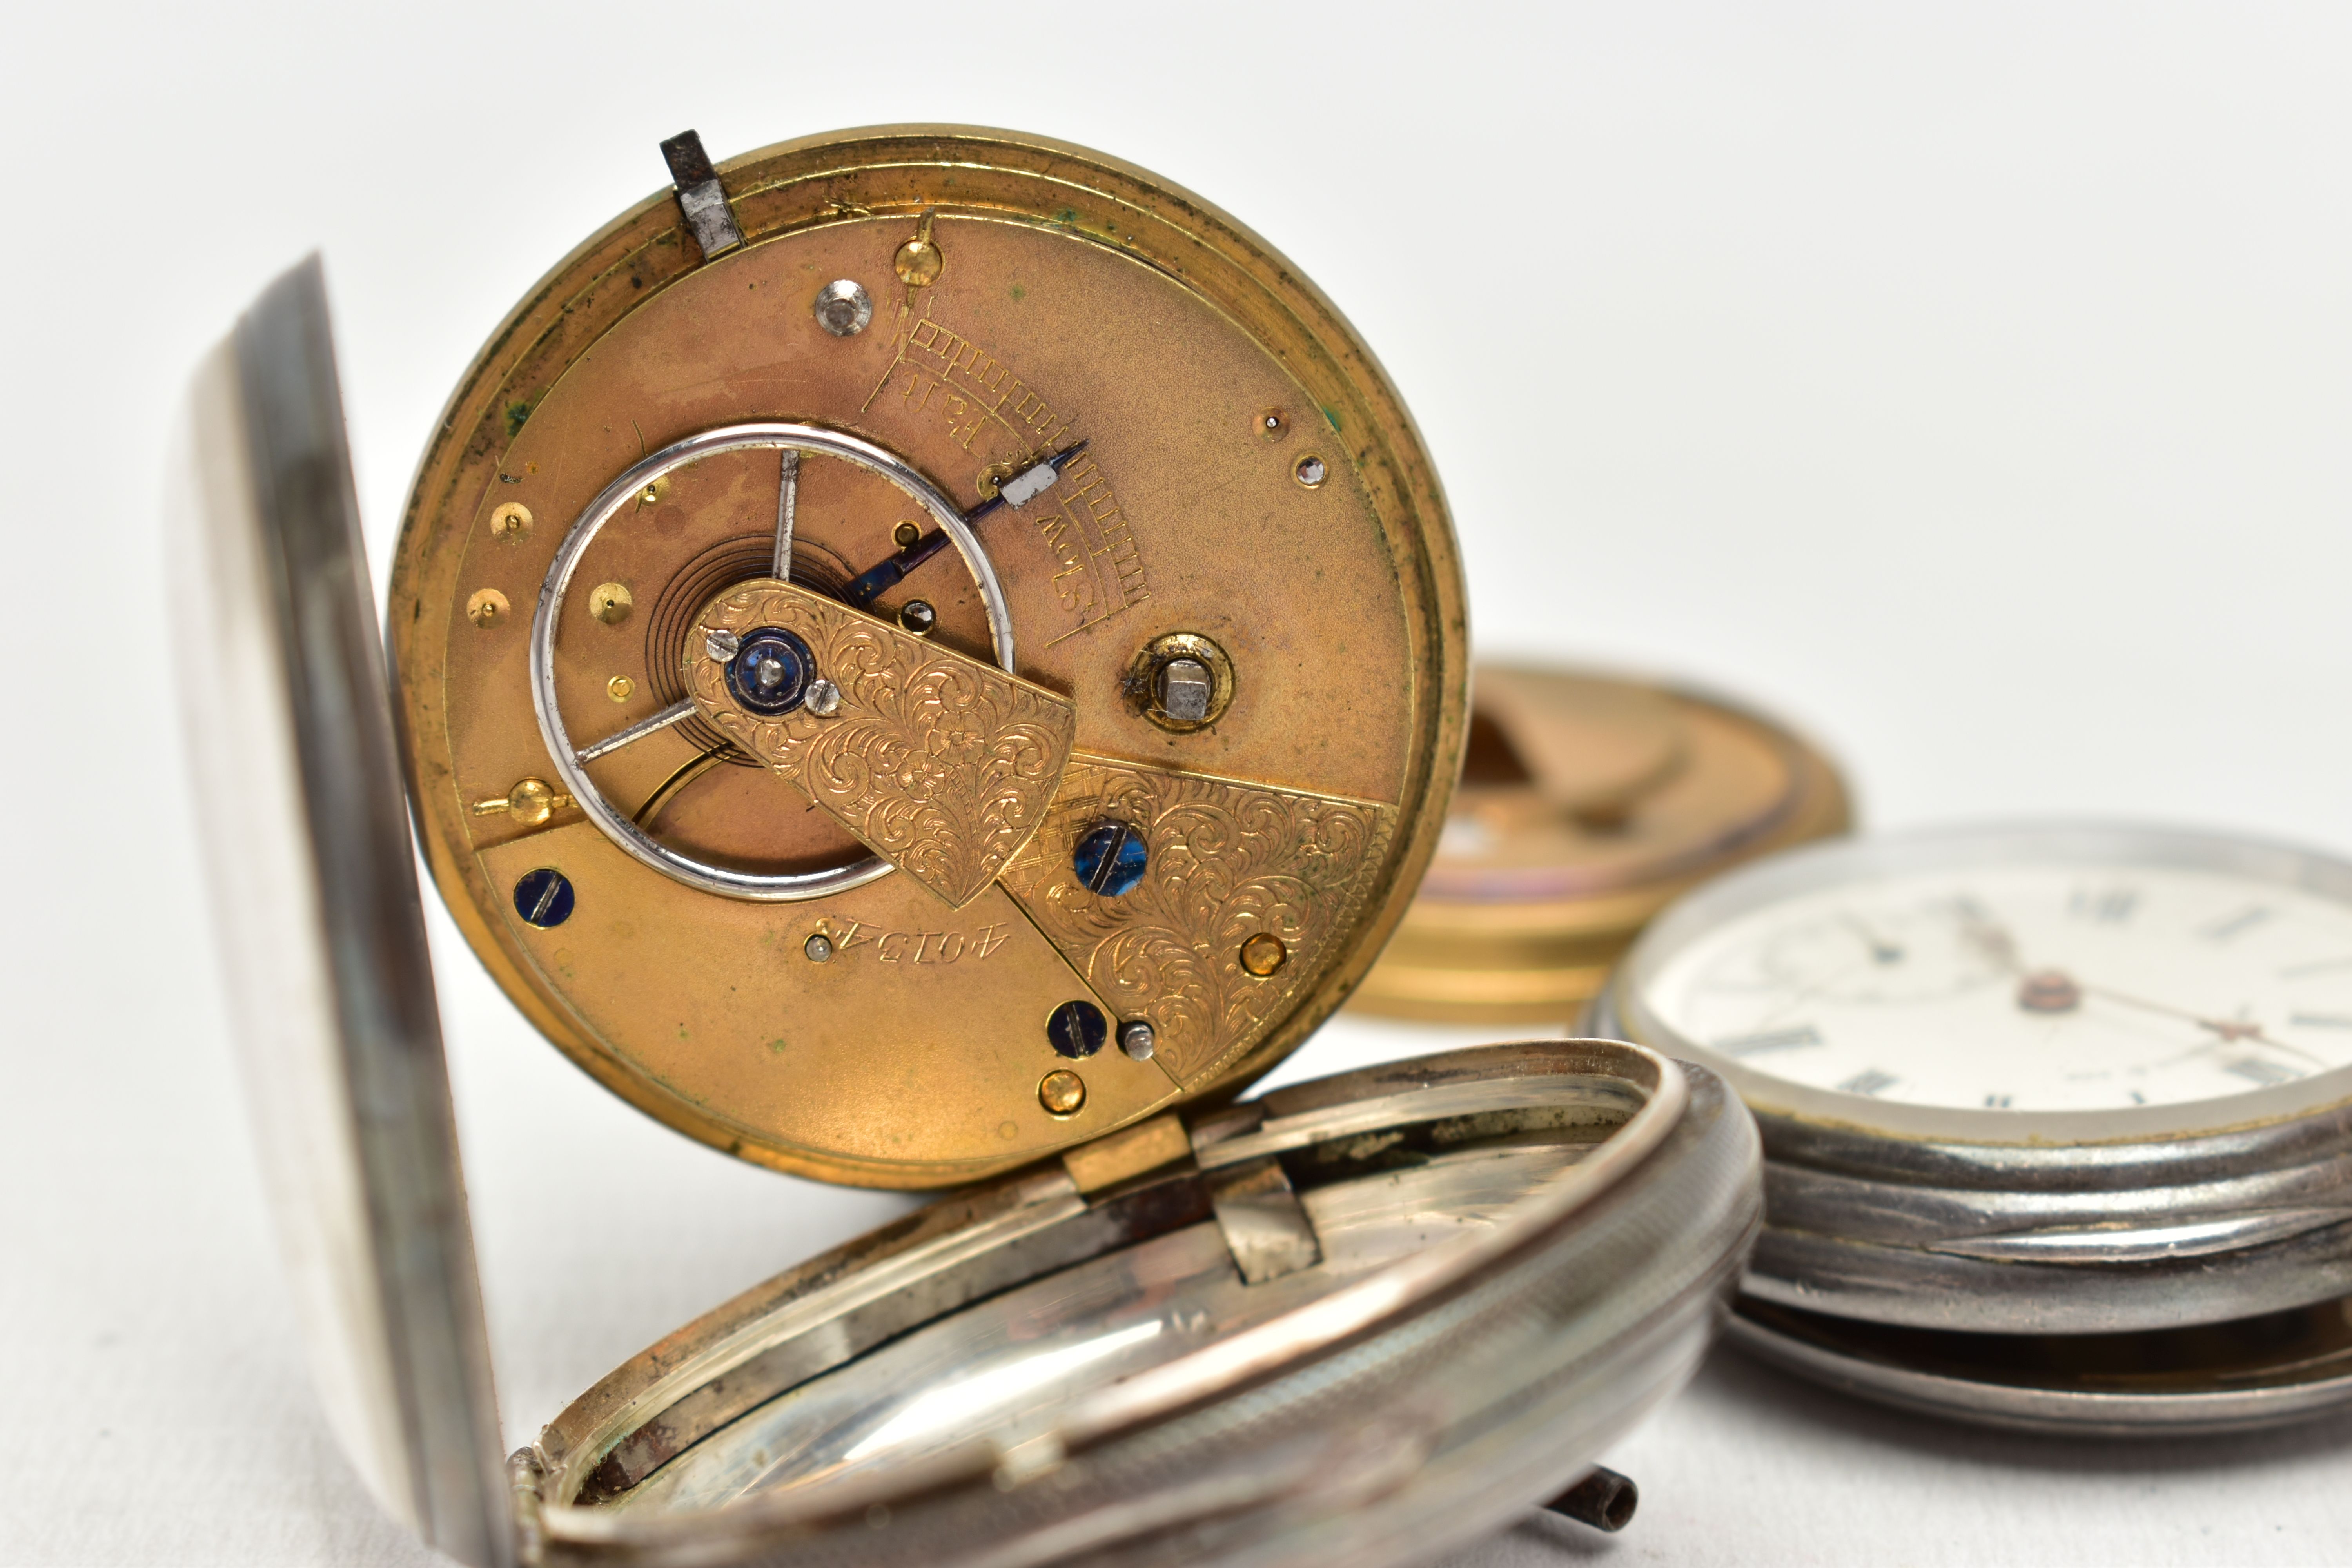 TWO OPEN FACE POCKET WATCHES AND WATCH KEY, the first a silver open face pocket watch, key wound, - Image 6 of 6